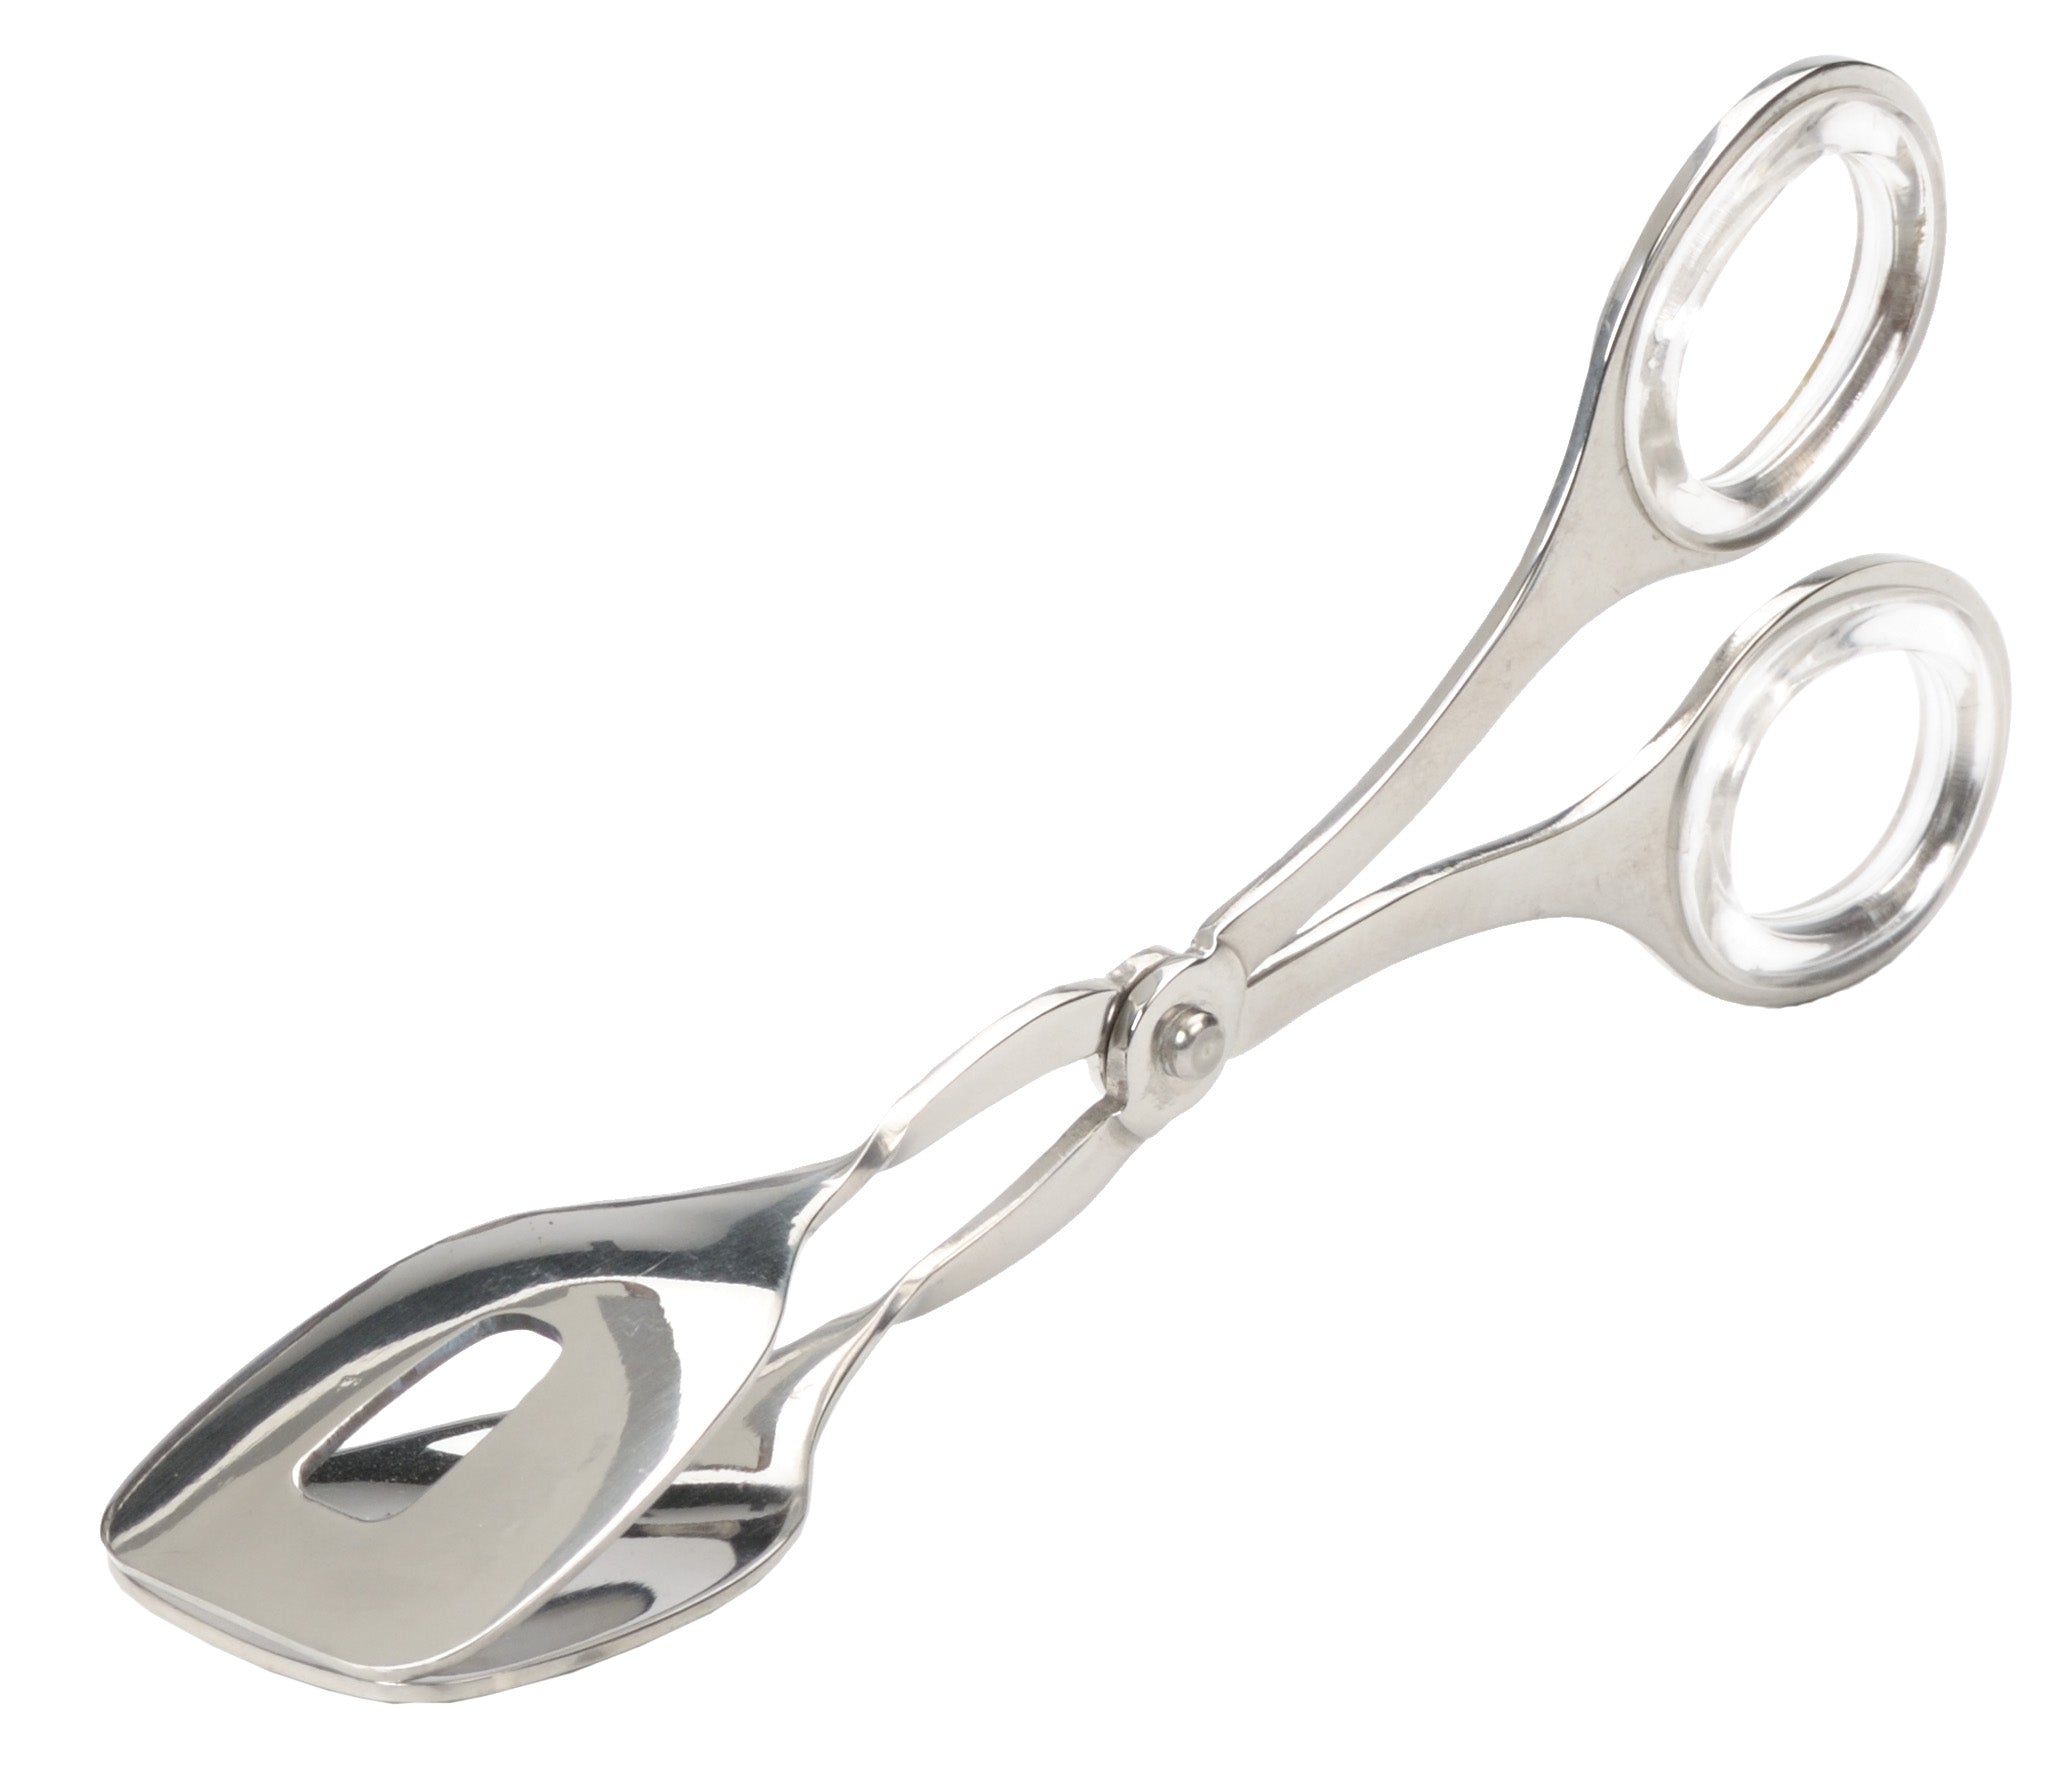 View RSVP - Endurance® Serving Tongs, Small